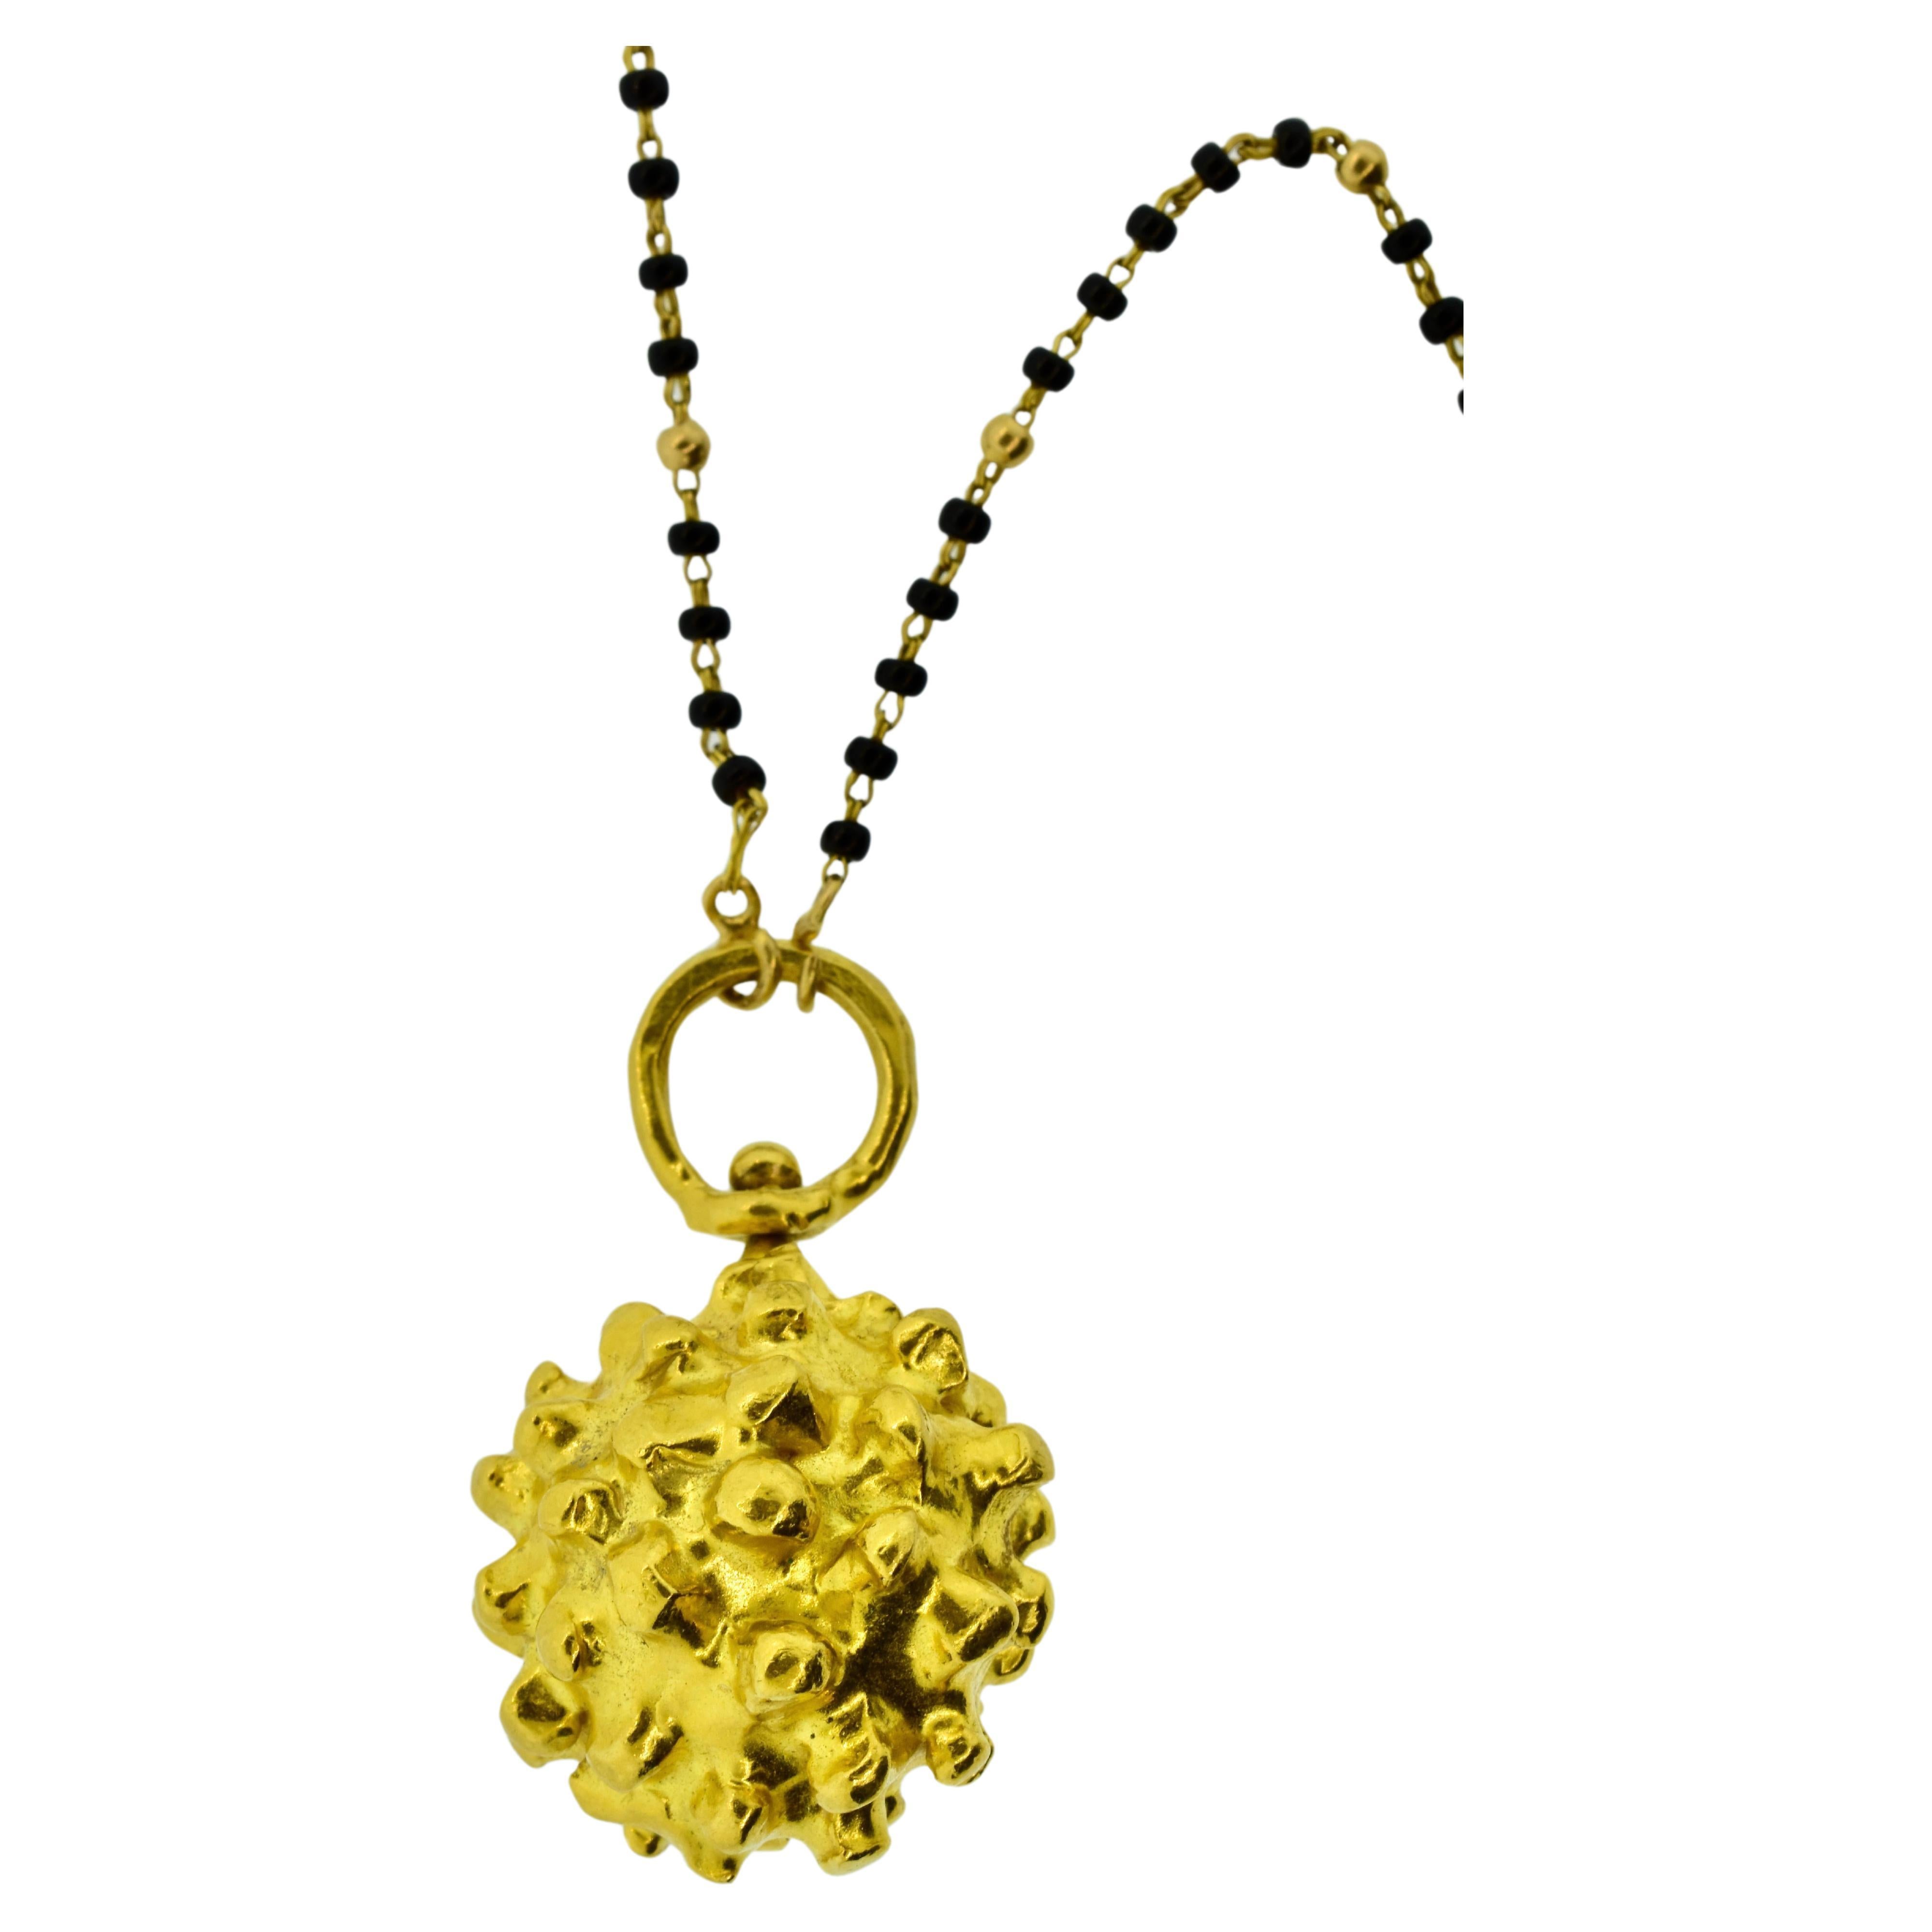 Jean Mahie Etruscan Large Ball Pendant in 22K Gold, French, c. 1990 For Sale